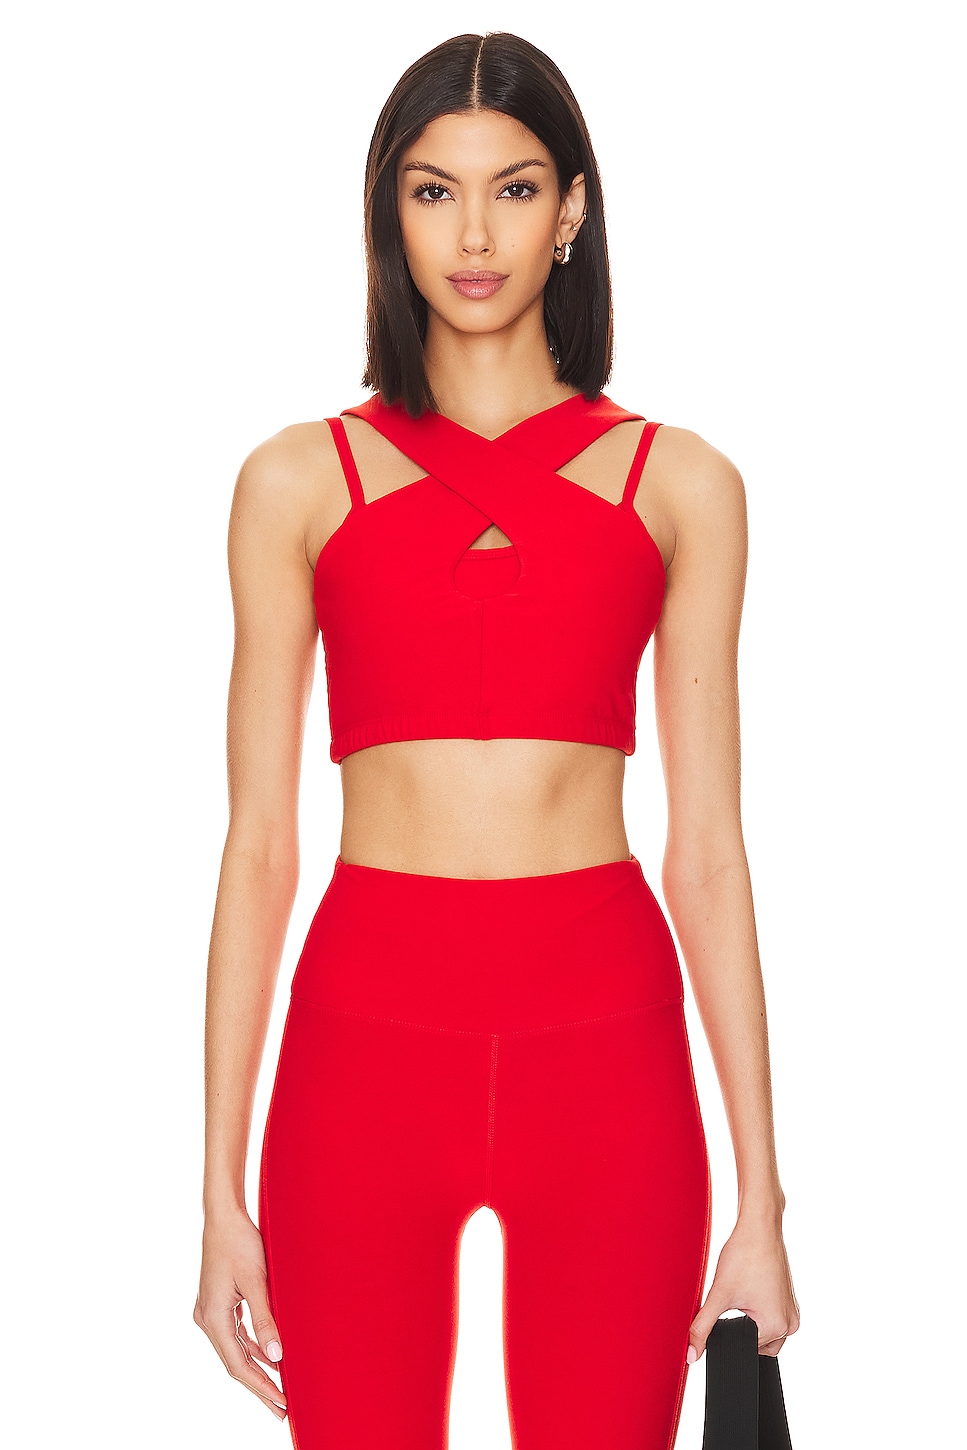 YEAR OF OURS Wrap Around Sports Bra in Red